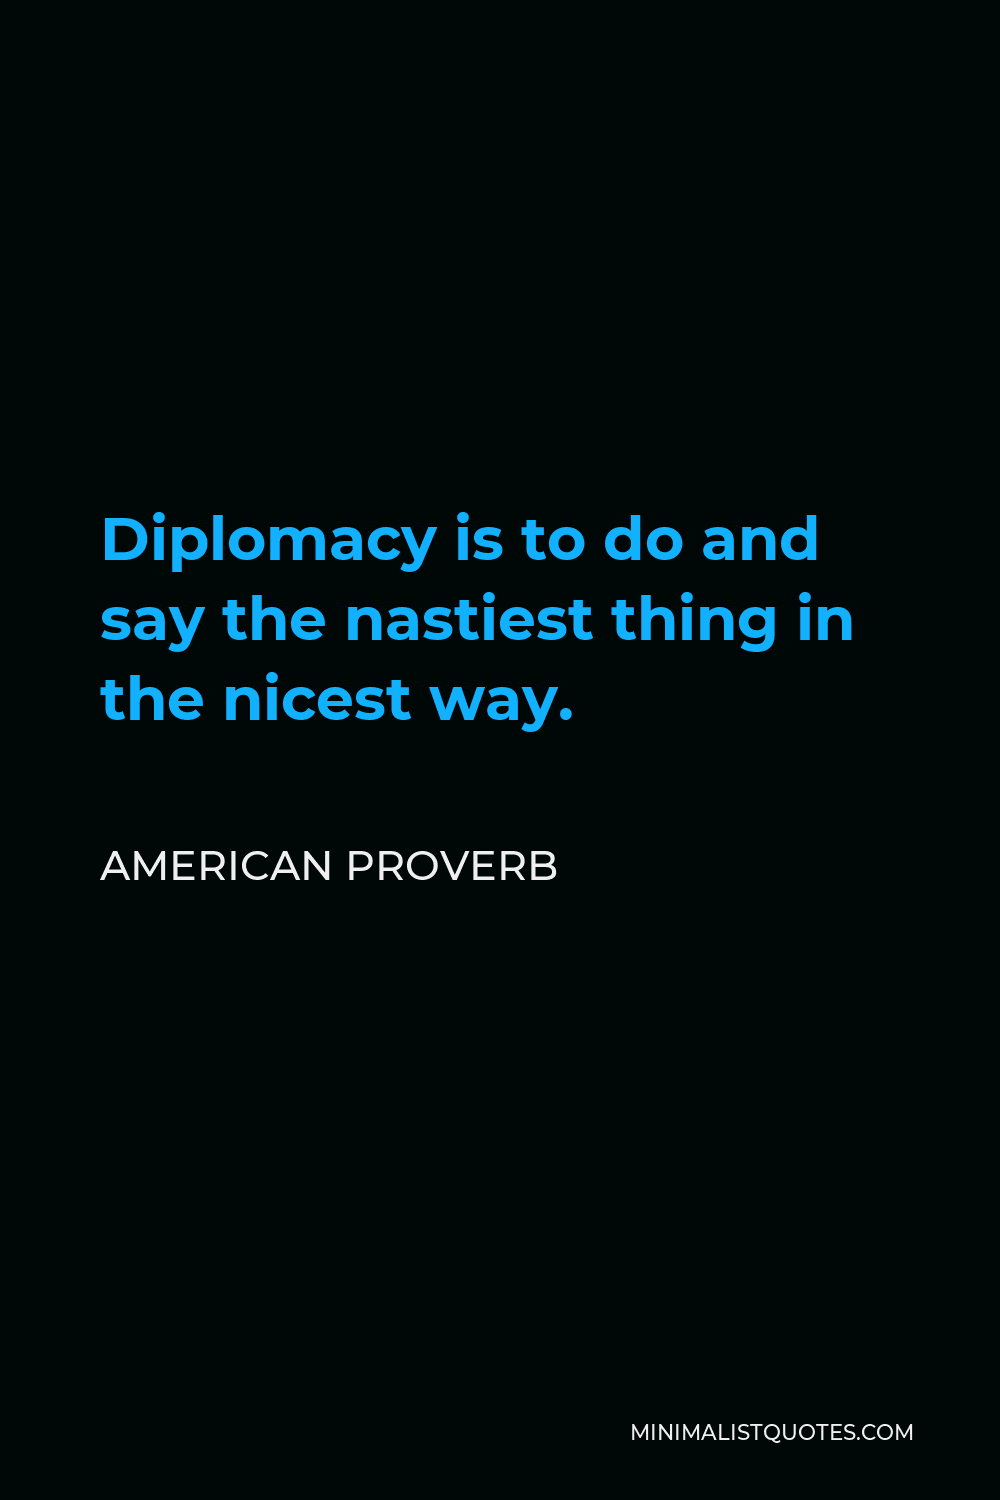 American Proverb Quote - Diplomacy is to do and say the nastiest thing in the nicest way.